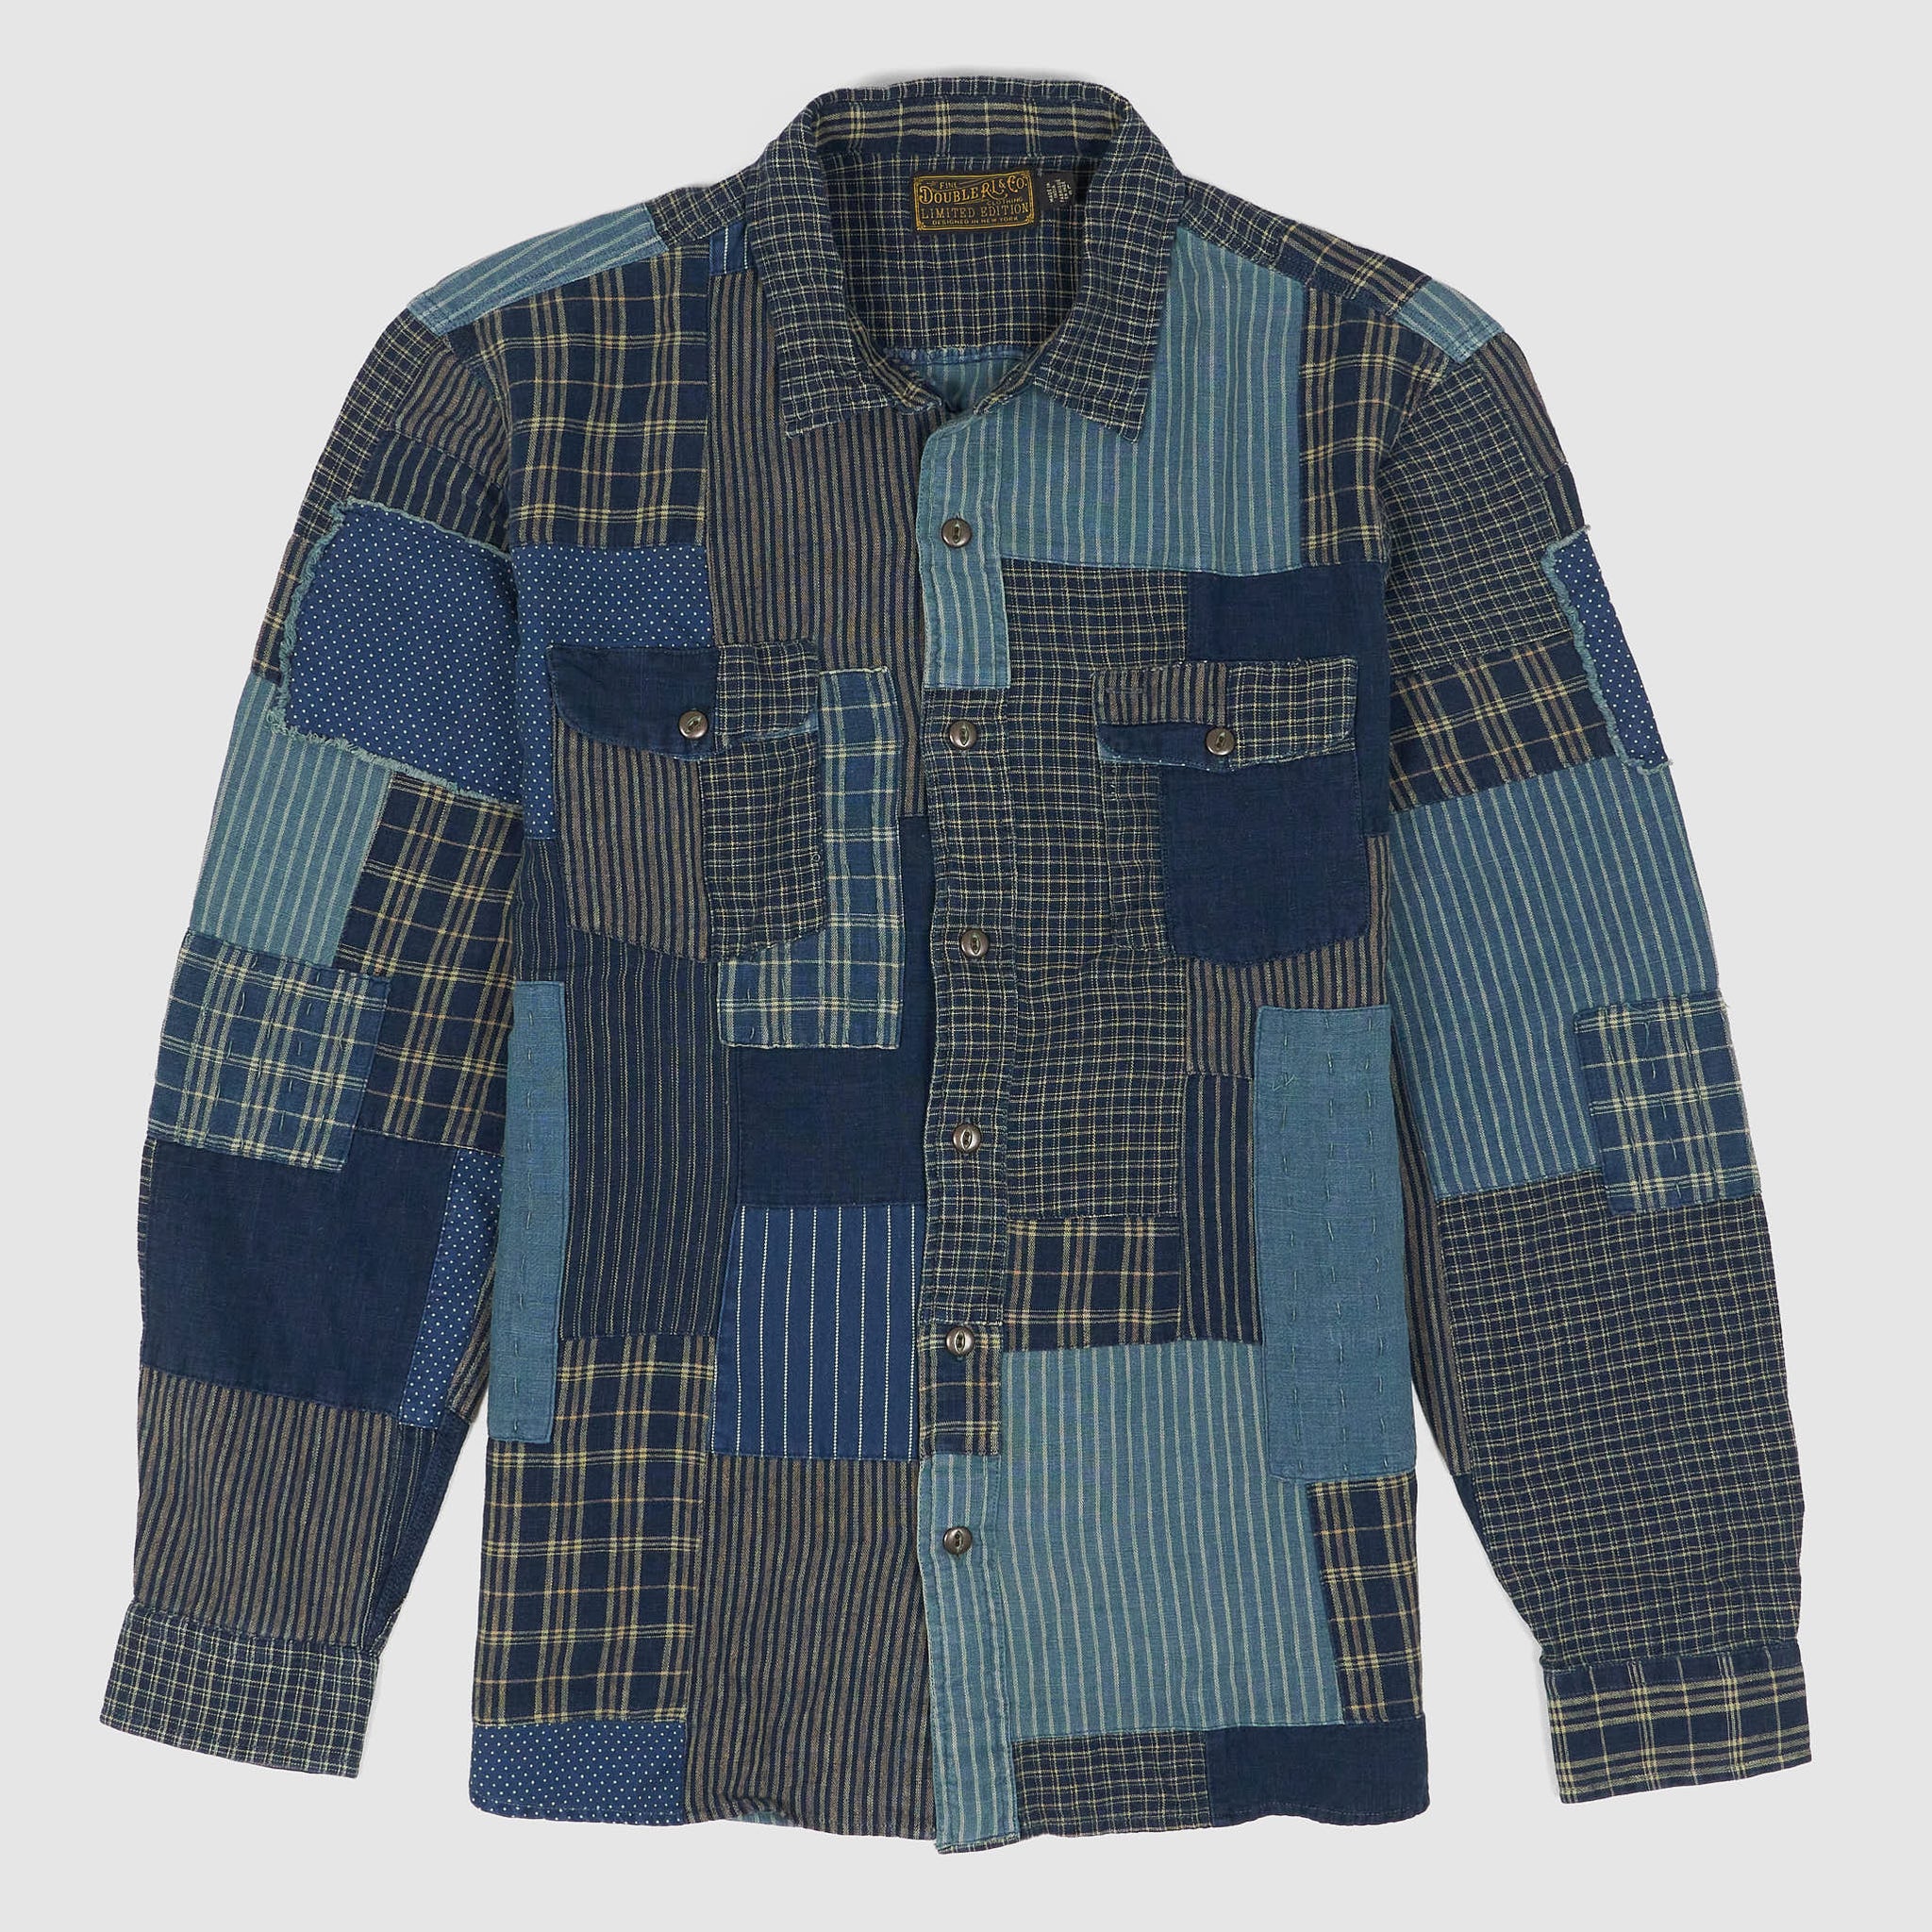 Double RL Limited Edition Patchwork Indigo Work Overshirt - DeeCee style